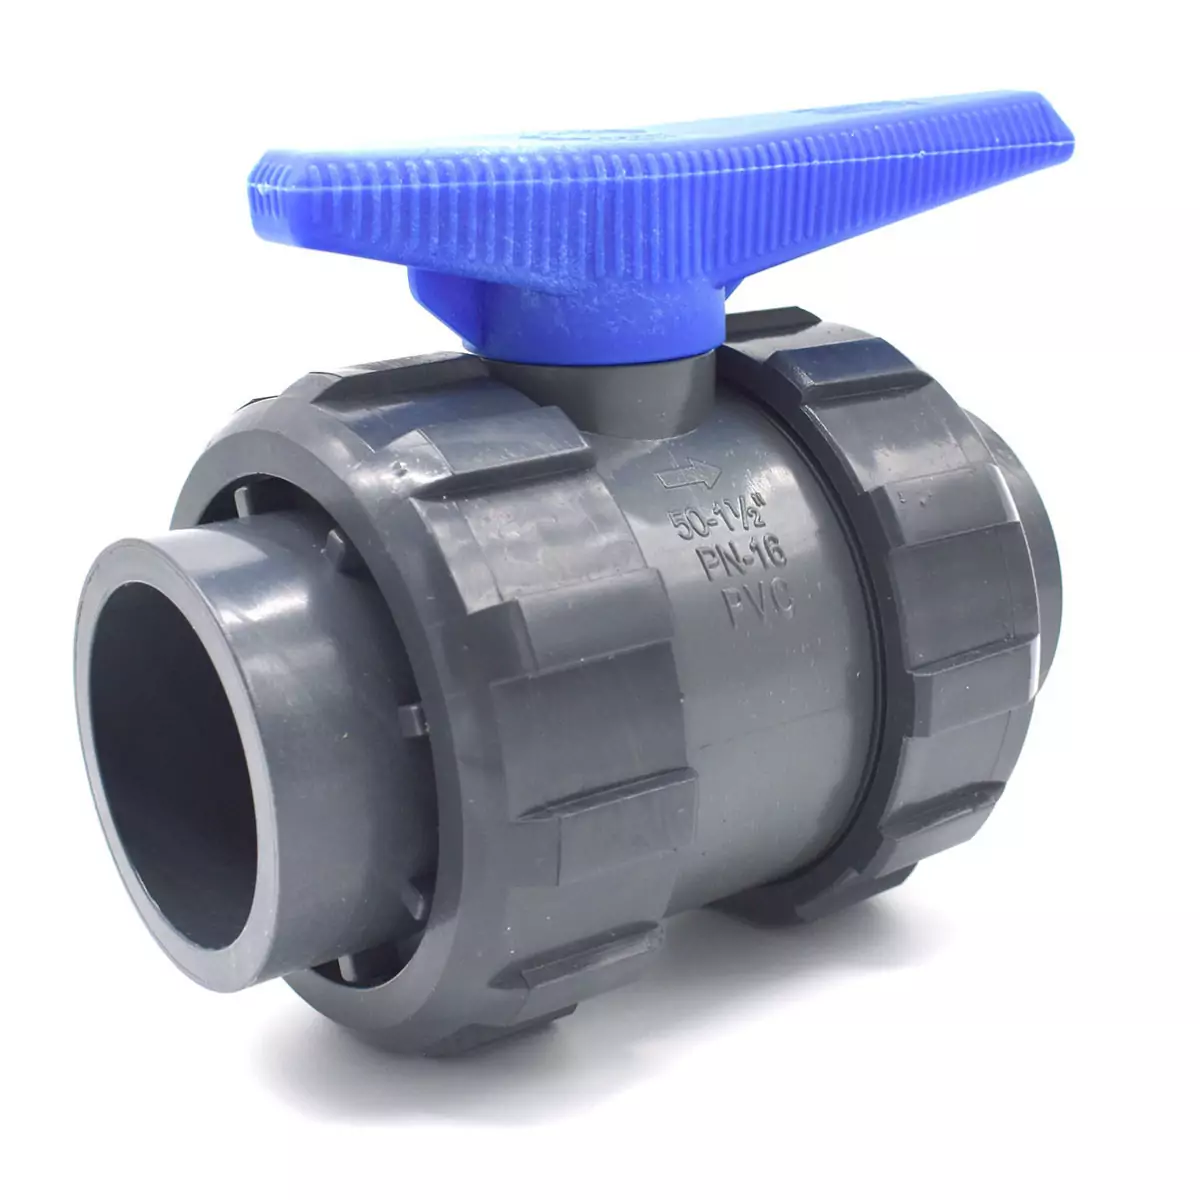 PVC ball valve double union - water serie - female connection to stick